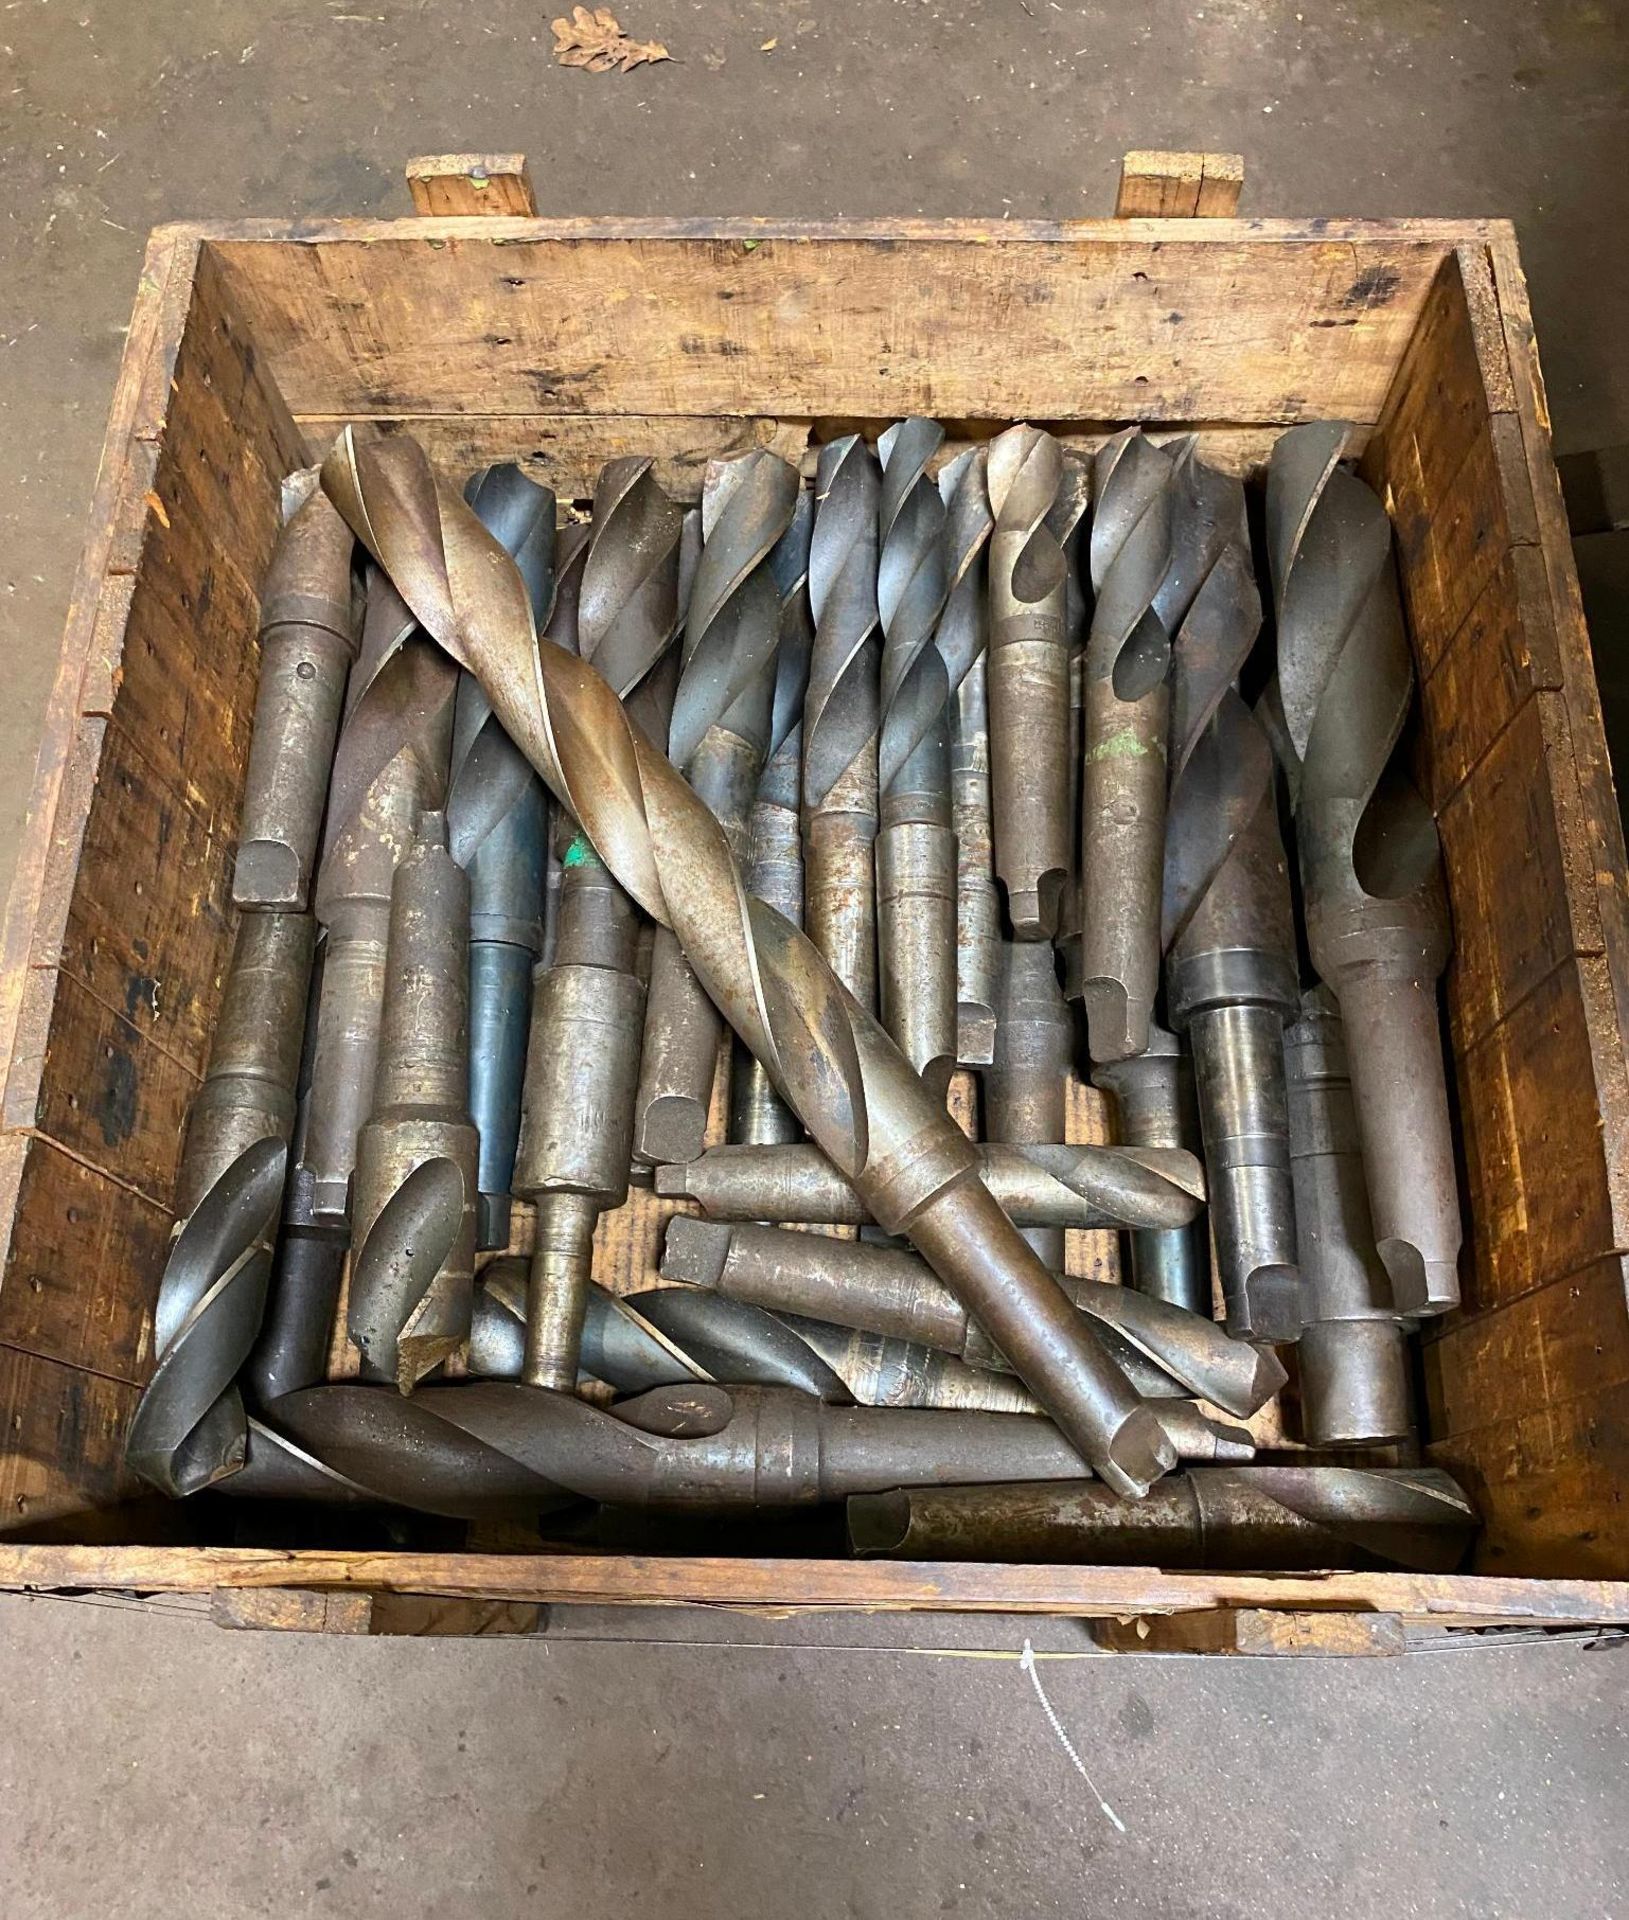 LOT OF TAPER SHANK TWIST DRILLS, in crate (Located at: P & M Machine, Private Road 3463, Gladewater,